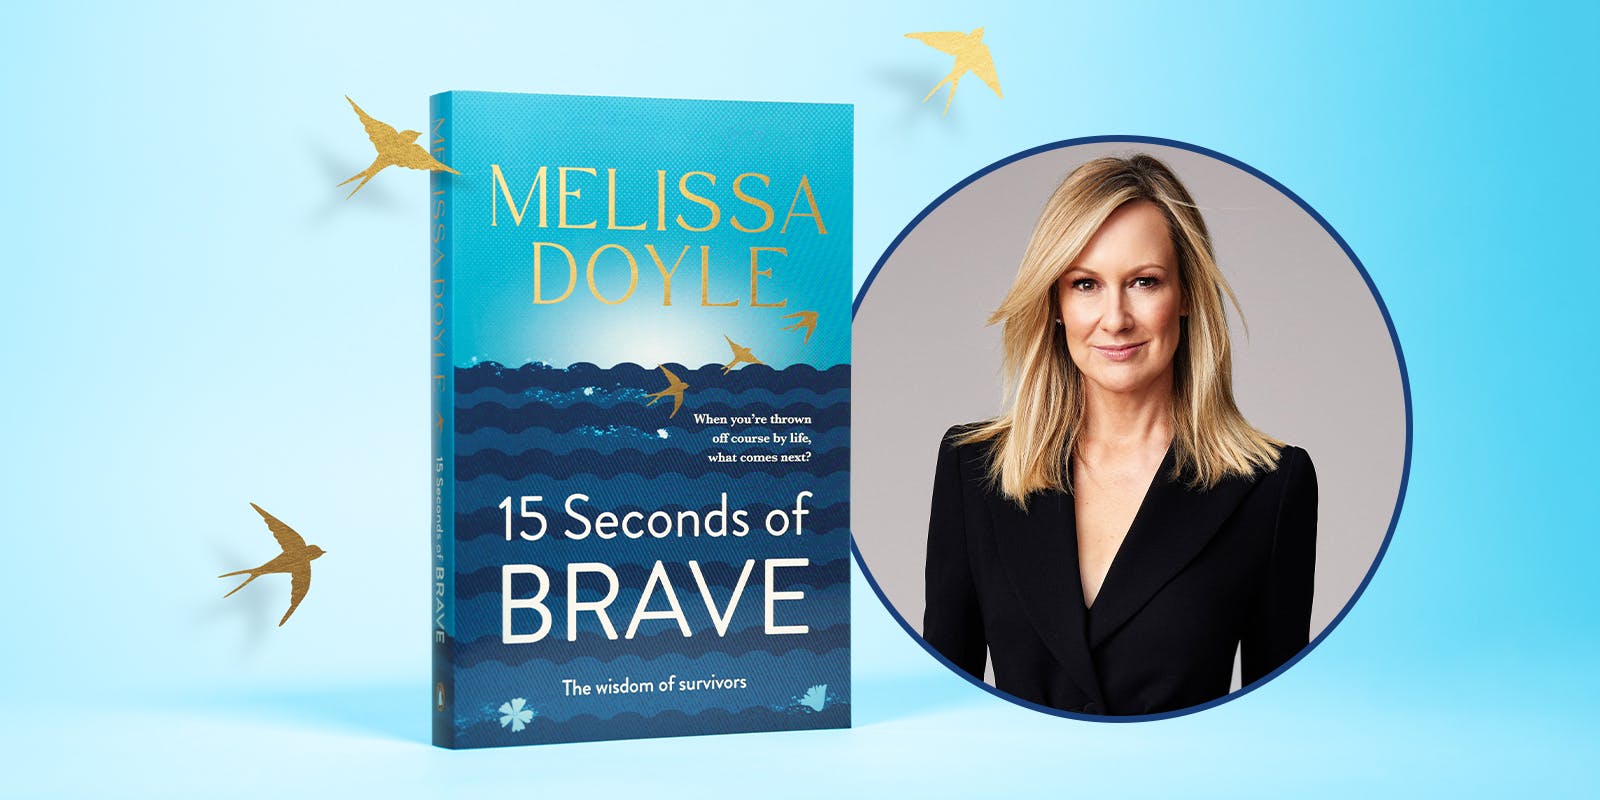 Melissa Doyle shares the biggest lesson she learned while writing new book